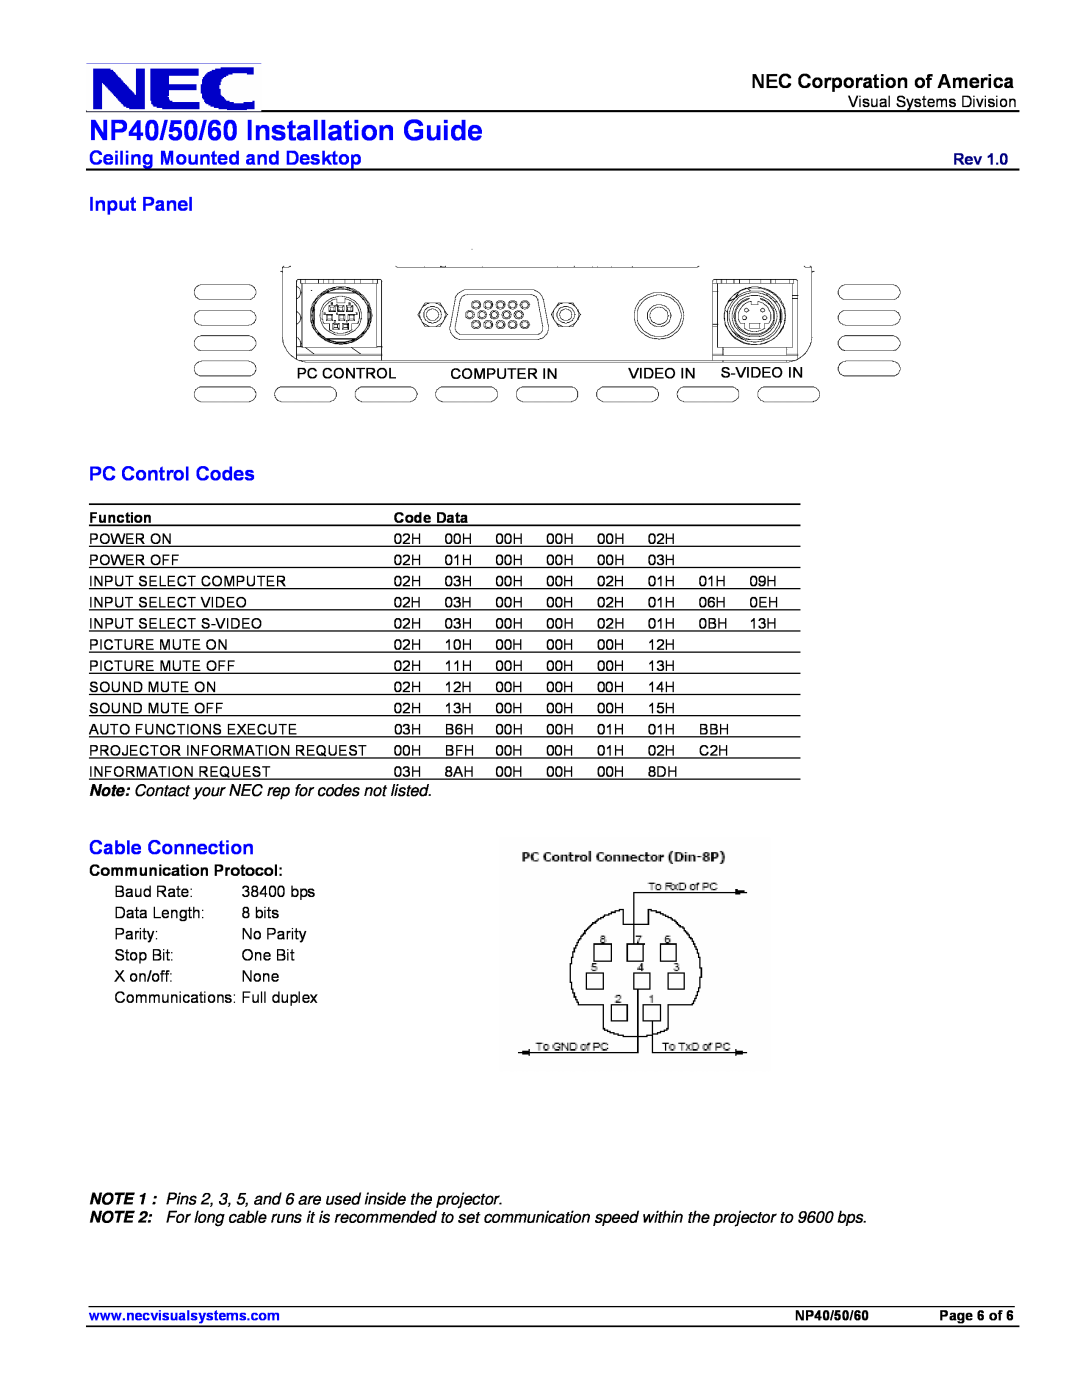 NEC NP60, NP50, NP40 NEC Corporation of America, Input Panel, PC Control Codes, Cable Connection, Communication Protocol 